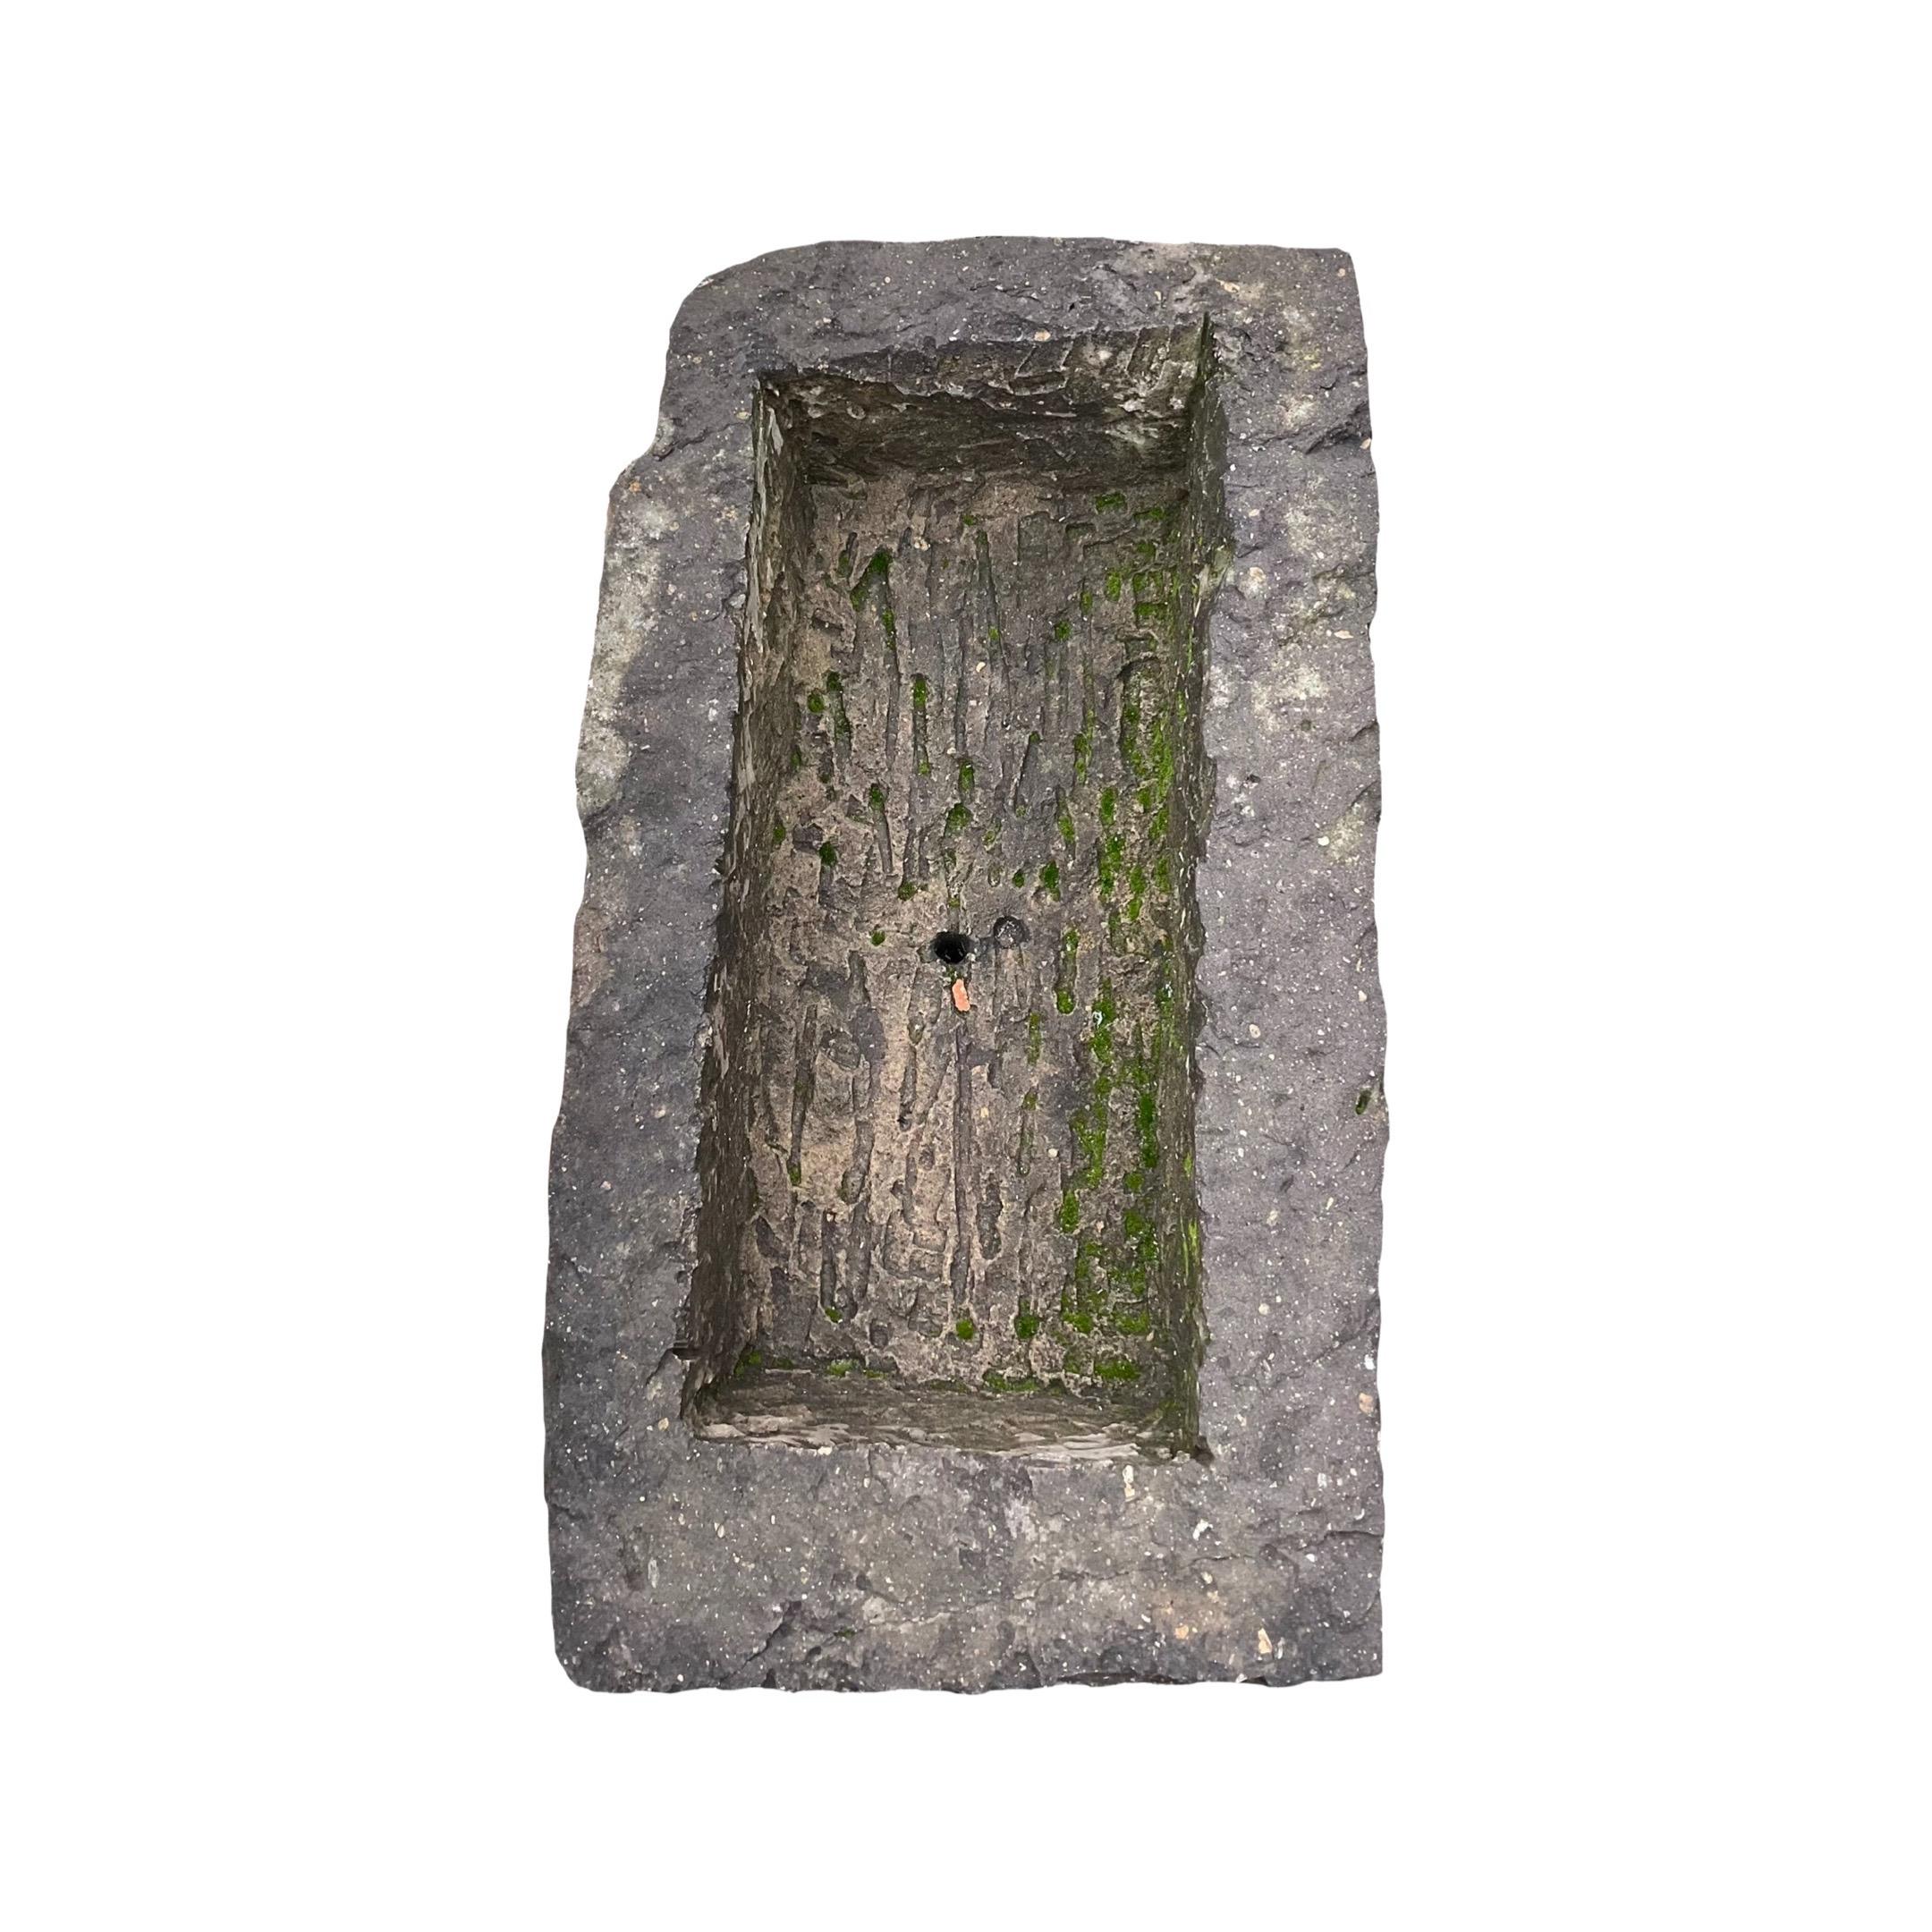 This 18th-century French limestone trough is a versatile addition to any garden. Its small style design and predrilled drainage hole make it ideal for a variety of plants or even to serve as a fountain. Crafted with high-quality limestone, this